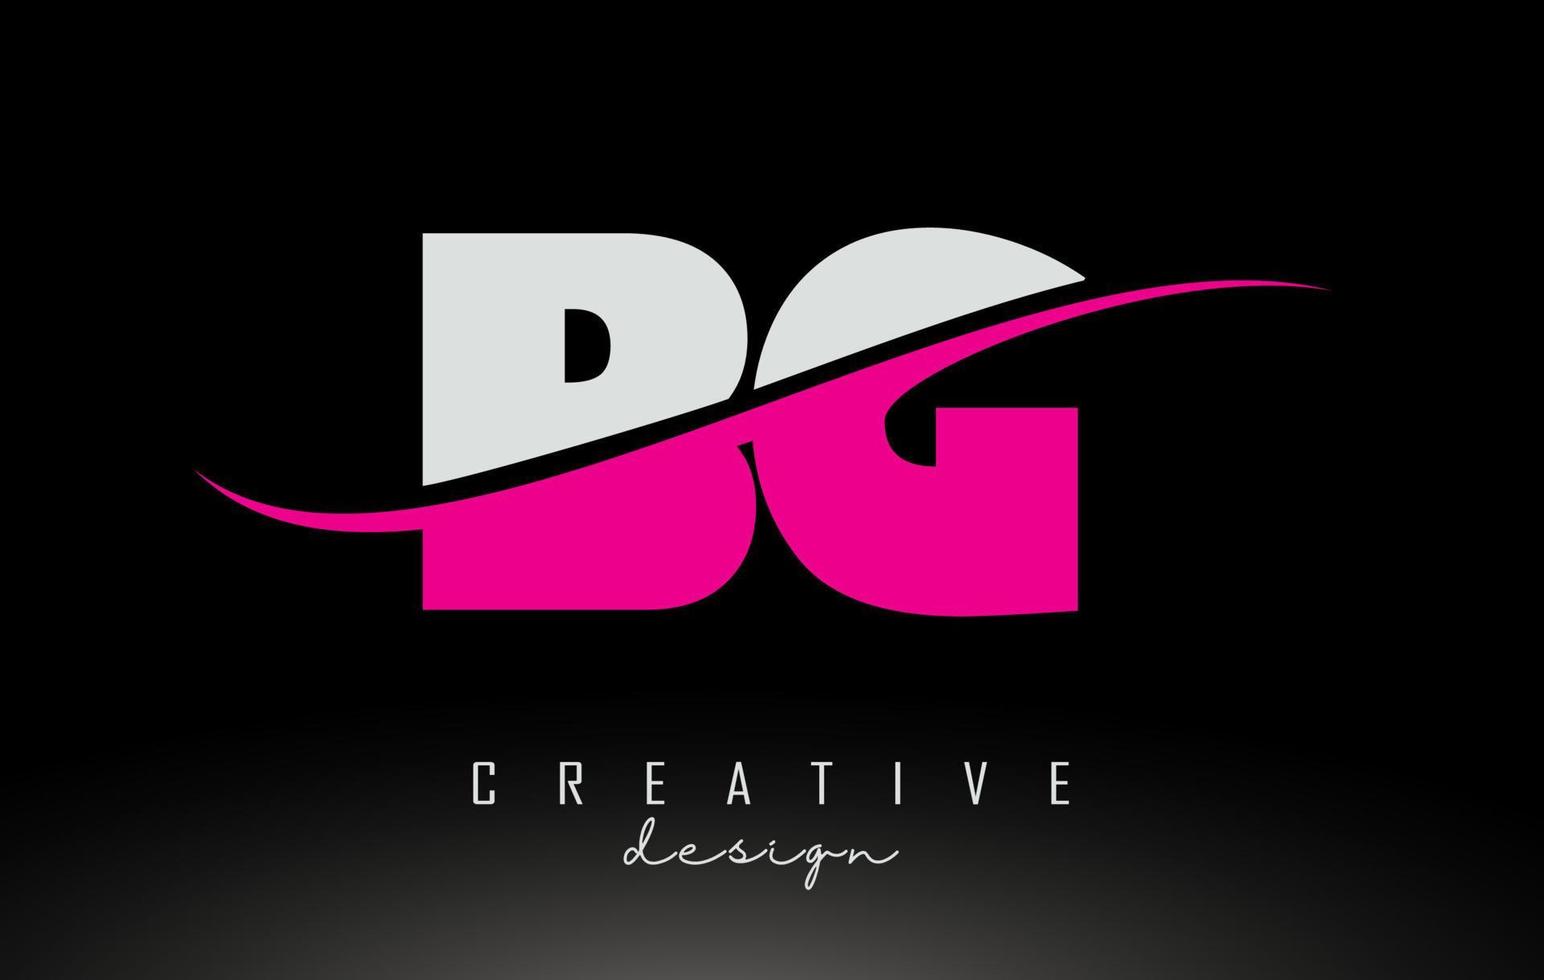 BG B G White and Pink Letter Logo with Swoosh. vector